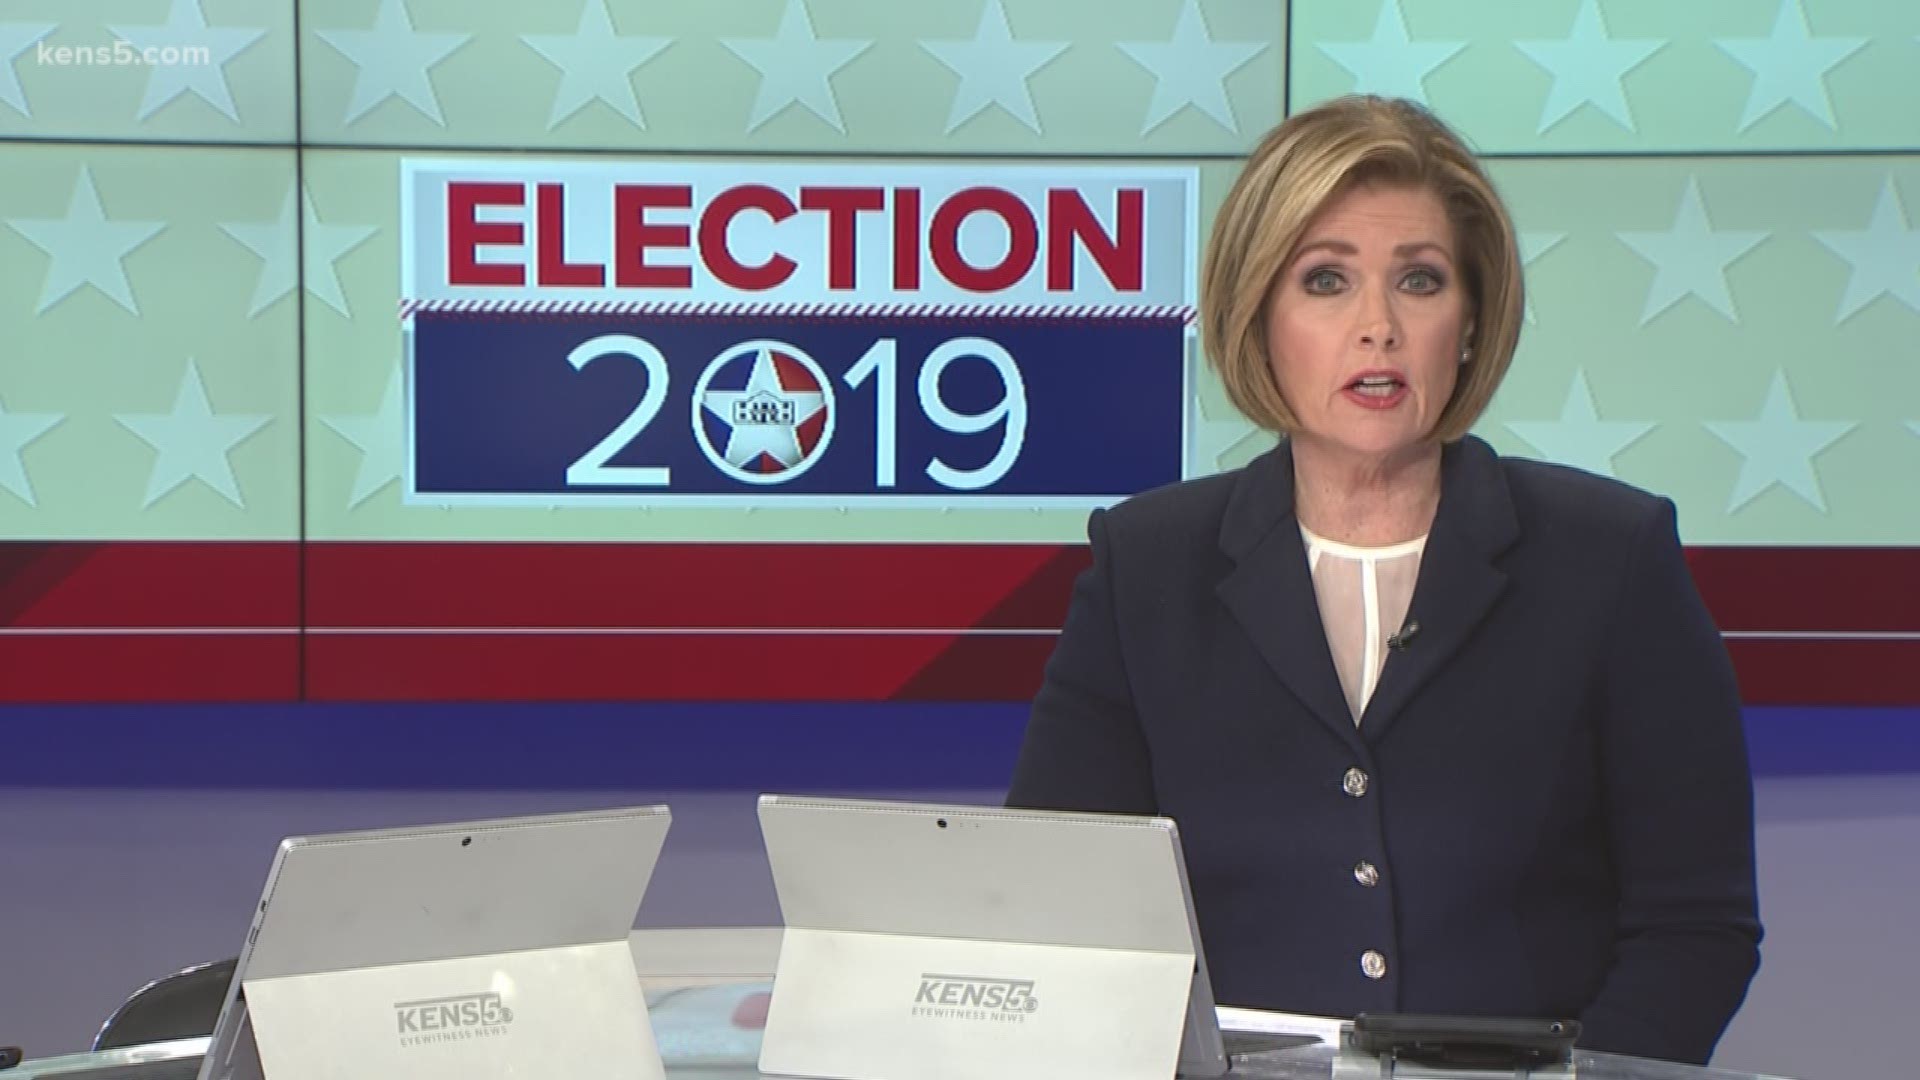 Neither of the two leading San Antonio mayoral candidates reached the 50% threshold needed to claim victory Saturday, meaning the race will be extended by a month.